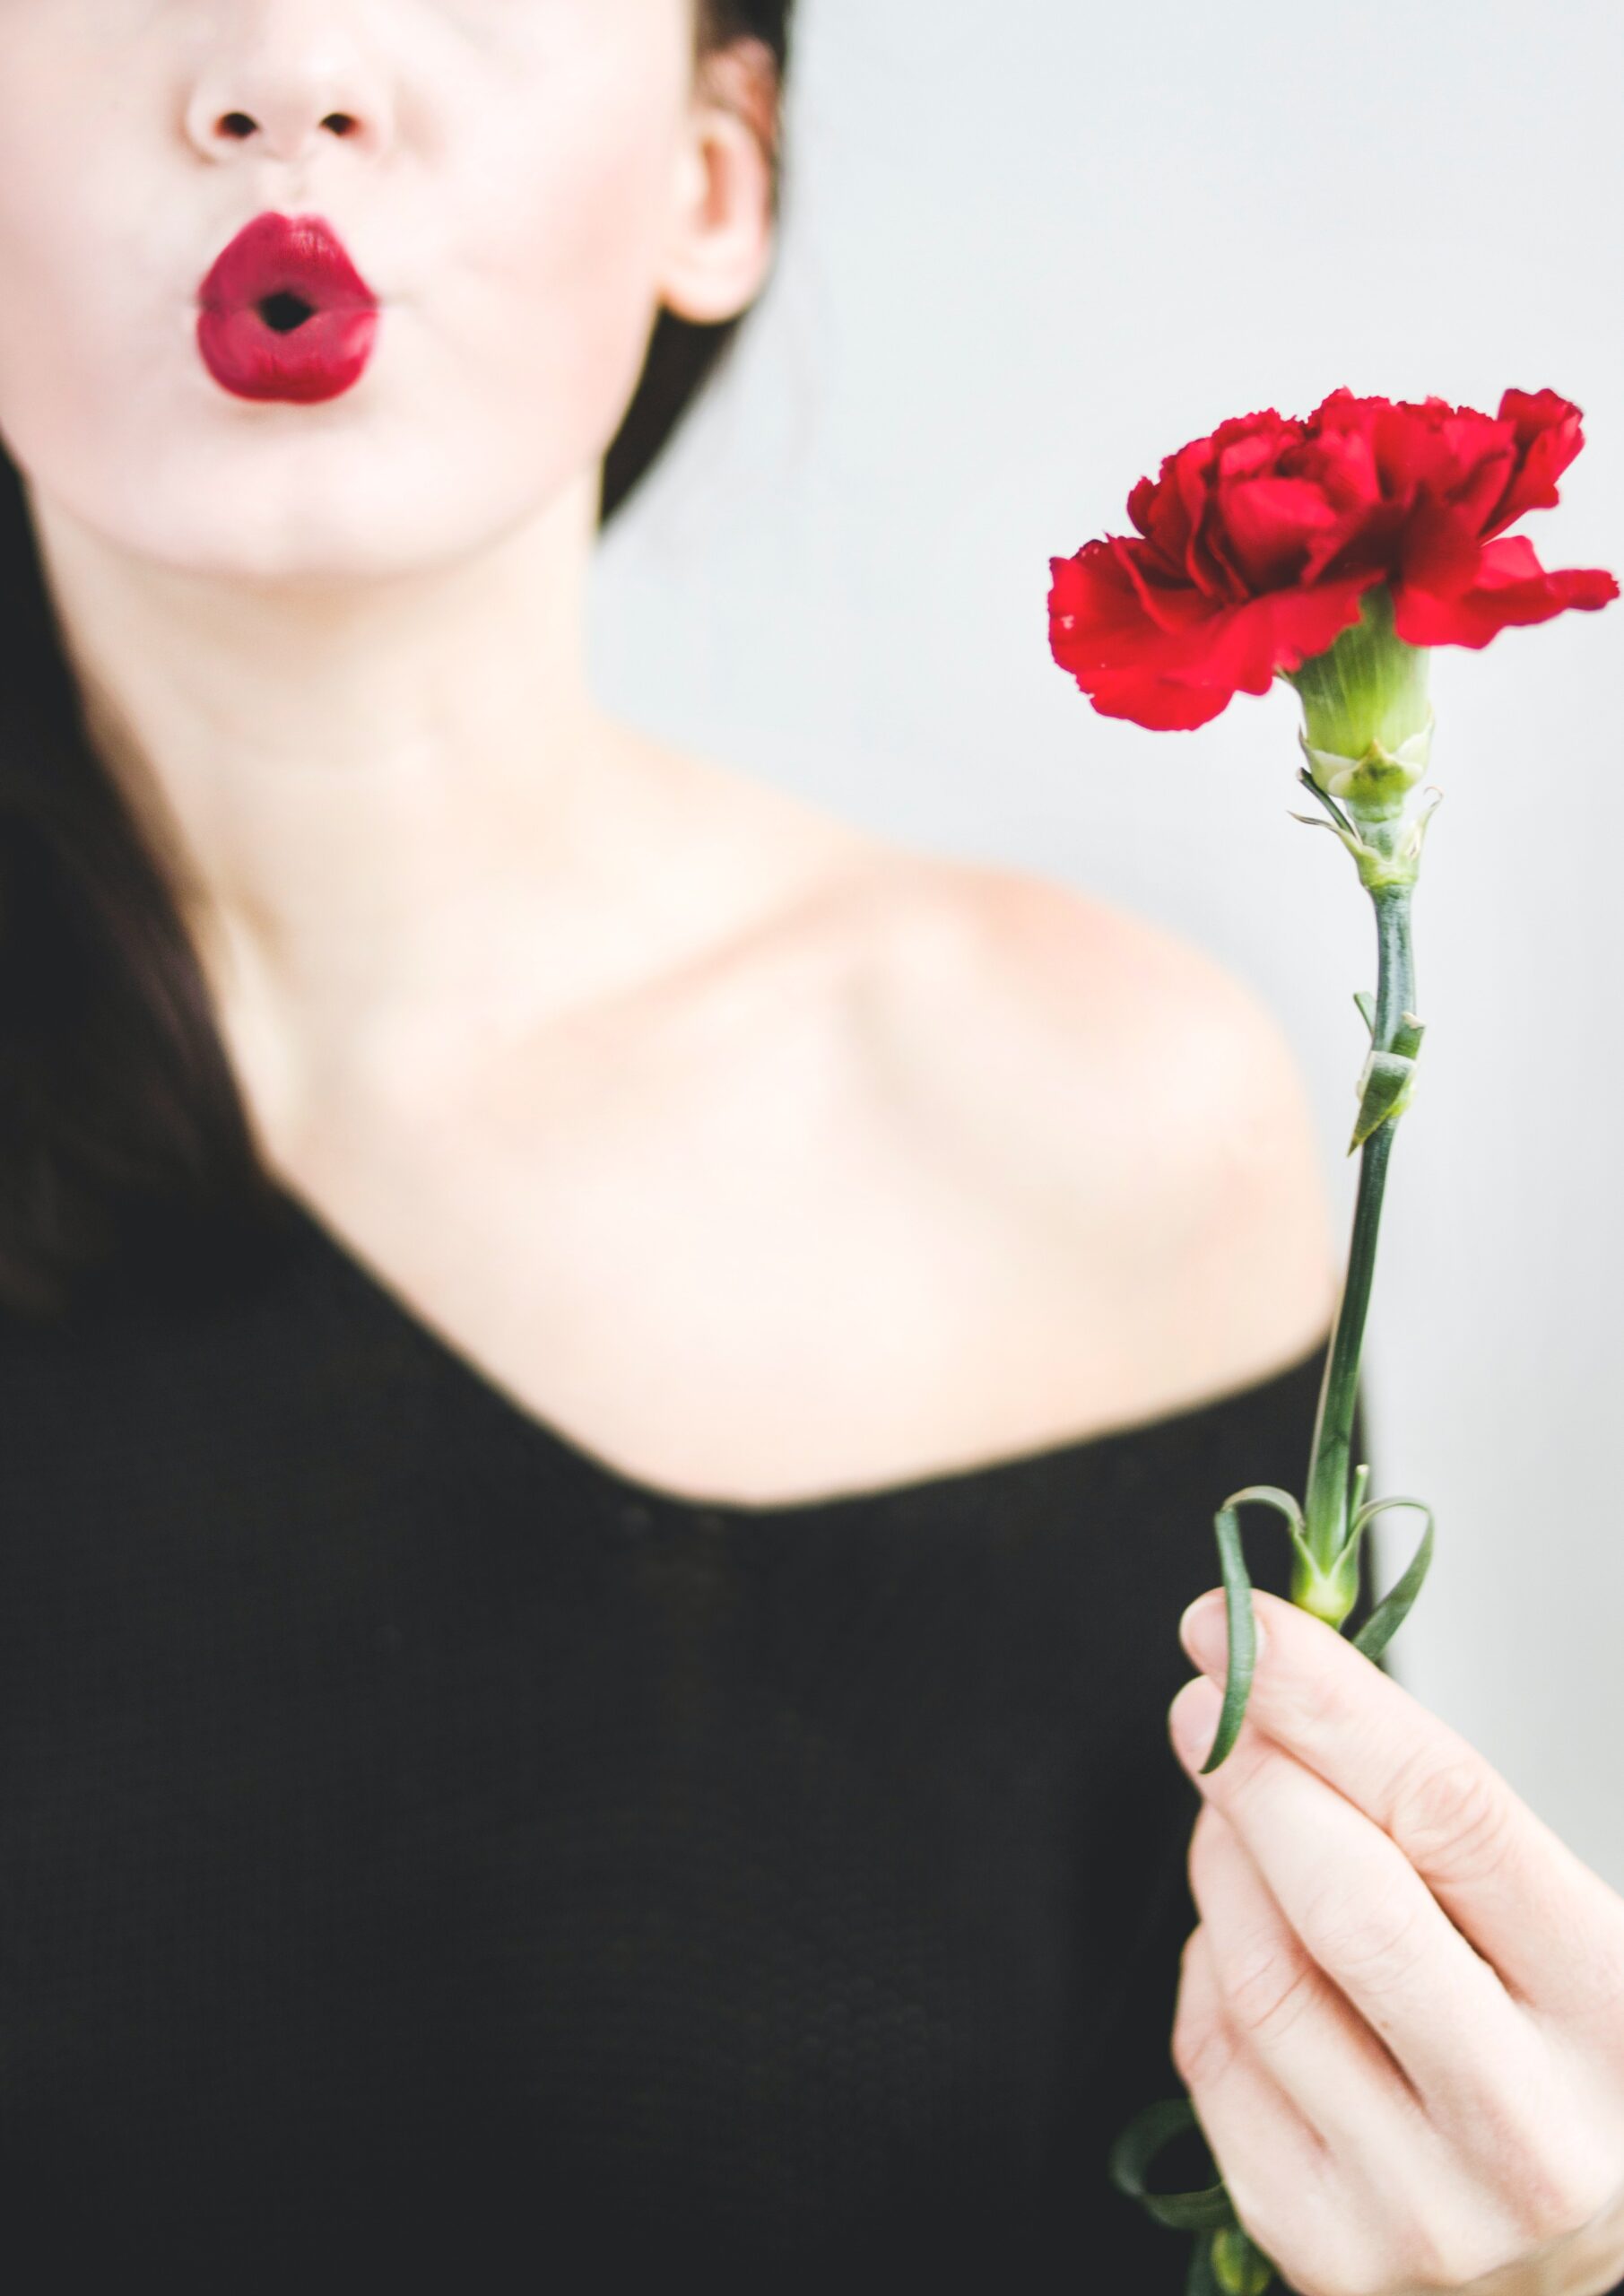 photo-of-a-woman-holding-red-carnation-flower